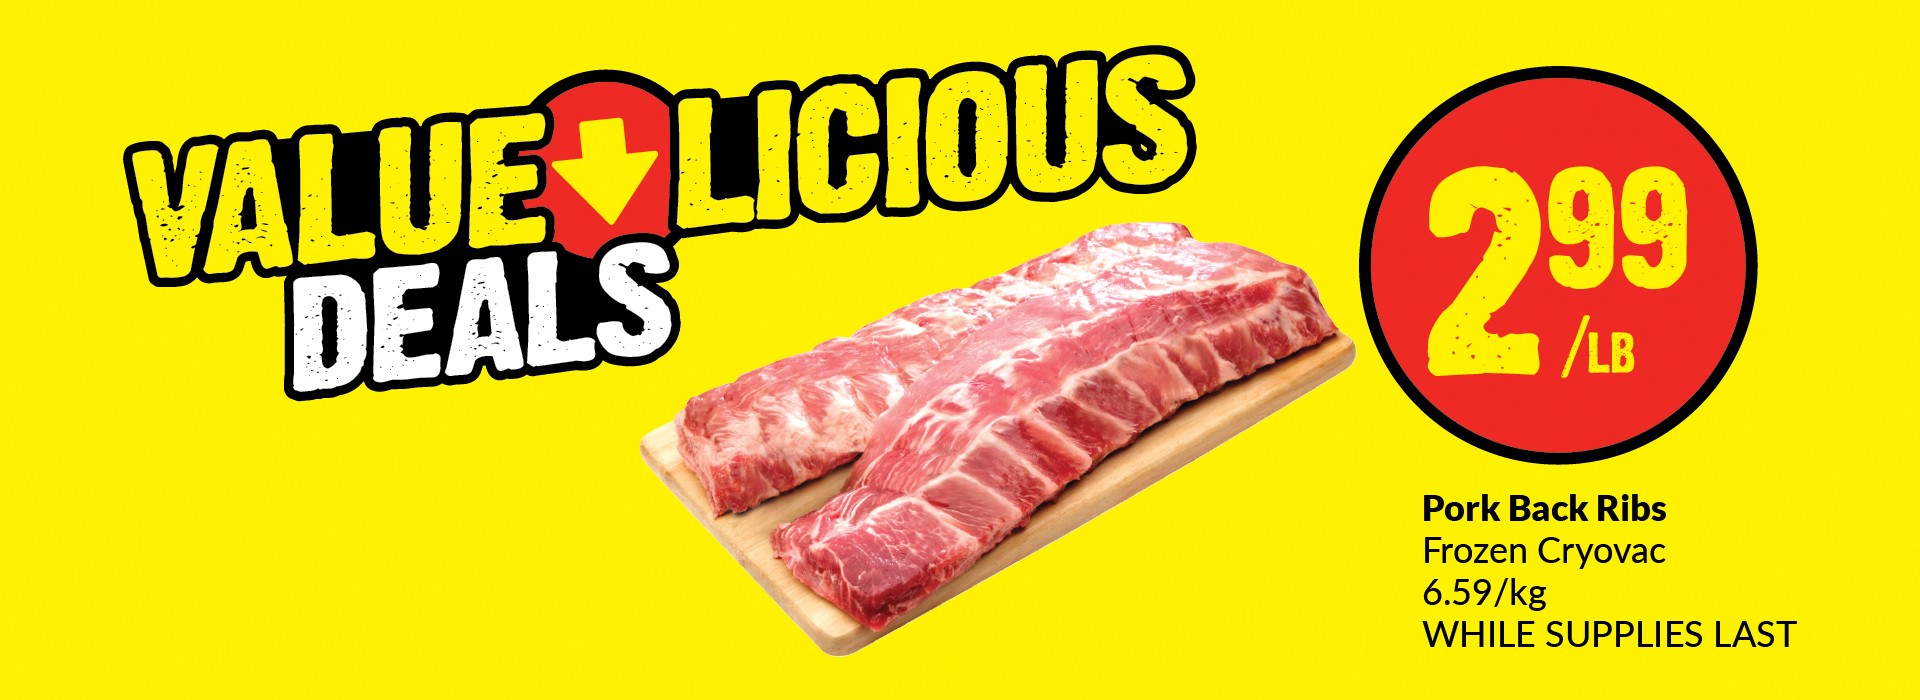 This image has the following text, "Value Licious Deals, Pork Back Ribs, Frozen Cryovac 6.59/Kg White Supplies Last. Get it at $2.99/LB."